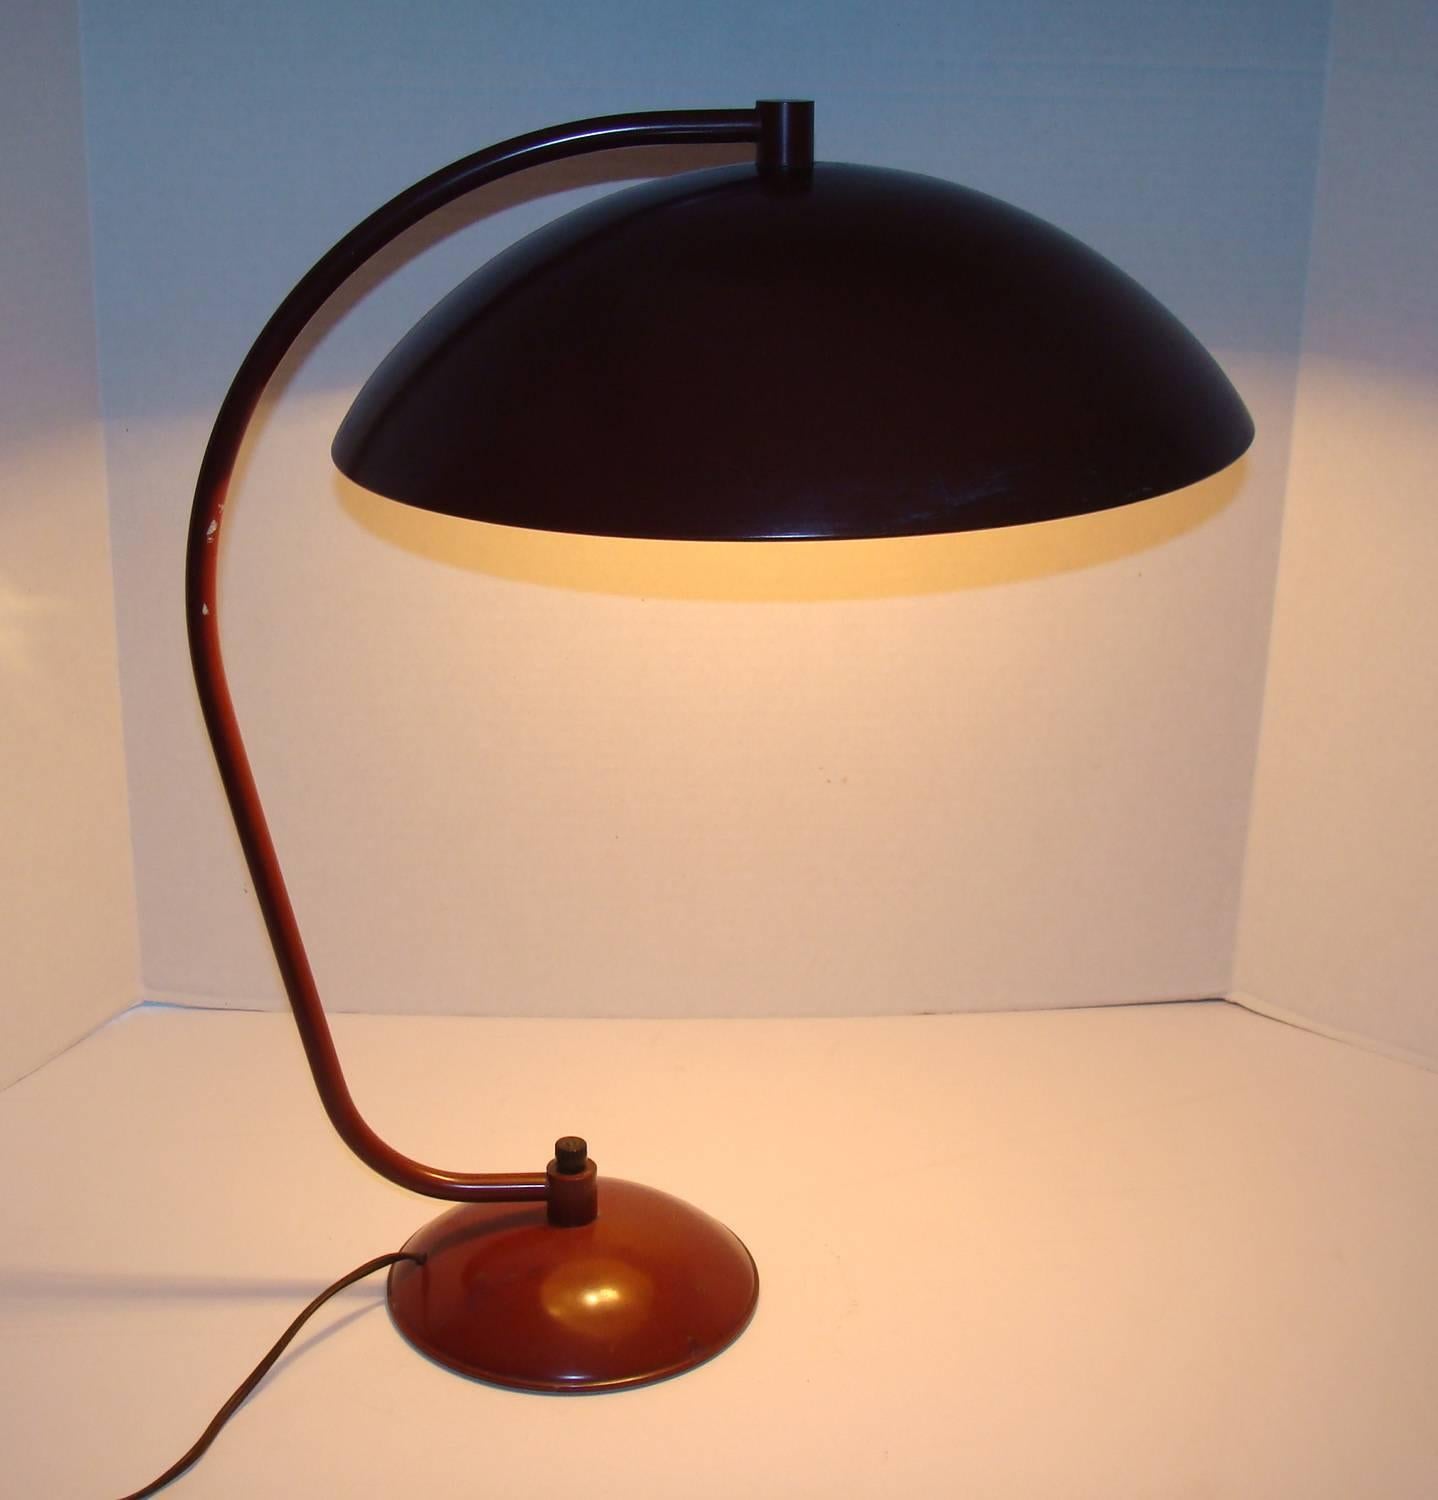 One of our favorite Versen designs. Hard to find in original condition. Dark red enamel exhibits very minor wear. Old wiring is usable but re-wiring is always recommended. Two porcelain sockets uses standard base lightbulbs.
Shade and base in